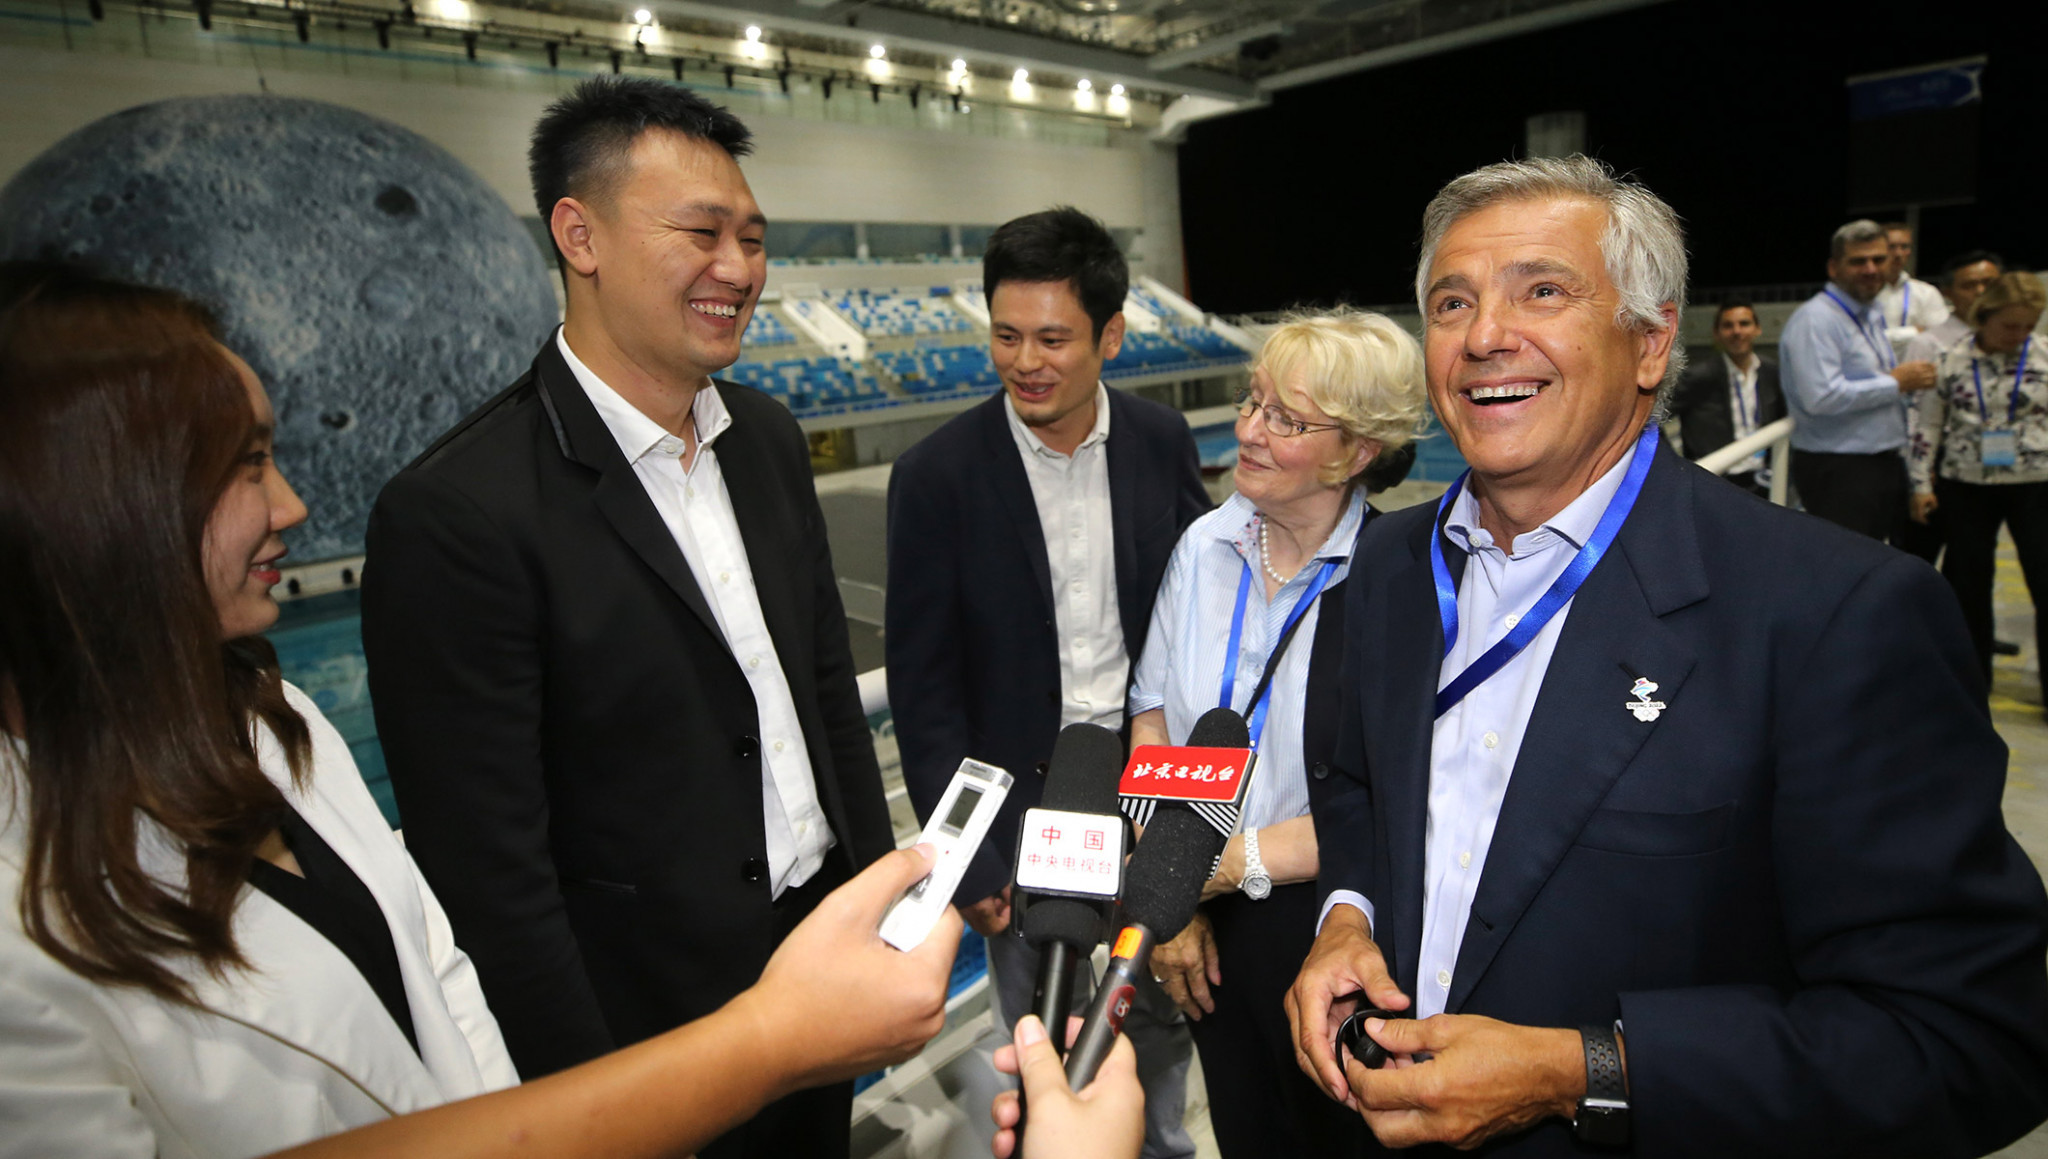 Coordination Commission chair Juan Antonio Samaranch claimed he was very confident in Beijing 2022's preparations ©IOC